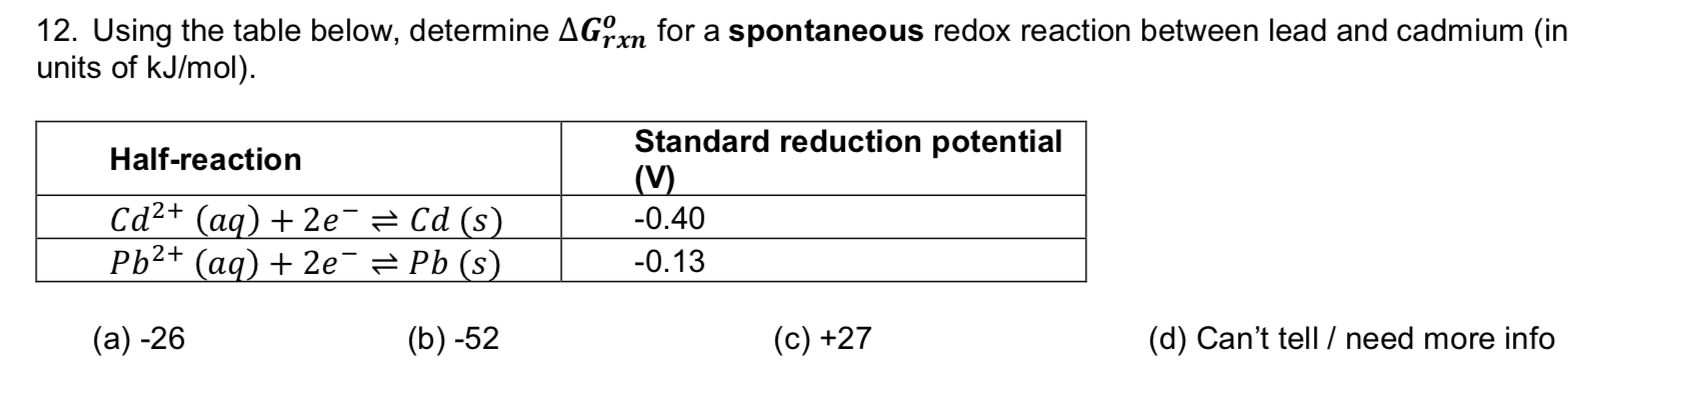 12. Using the table below, determine AGrn for a spontaneous redox reaction between lead and cadmium (in
units of kJ/mol)
rxn
Standard reduction potential
(V)
Half-reaction
Cd2+(aq)2e Cd (s)
Ph2+ (aq) 2e = Pb (s)
0.40
-0.13
(а) -26
(b) -52
(d) Can't tell /need more info
(c) +27
